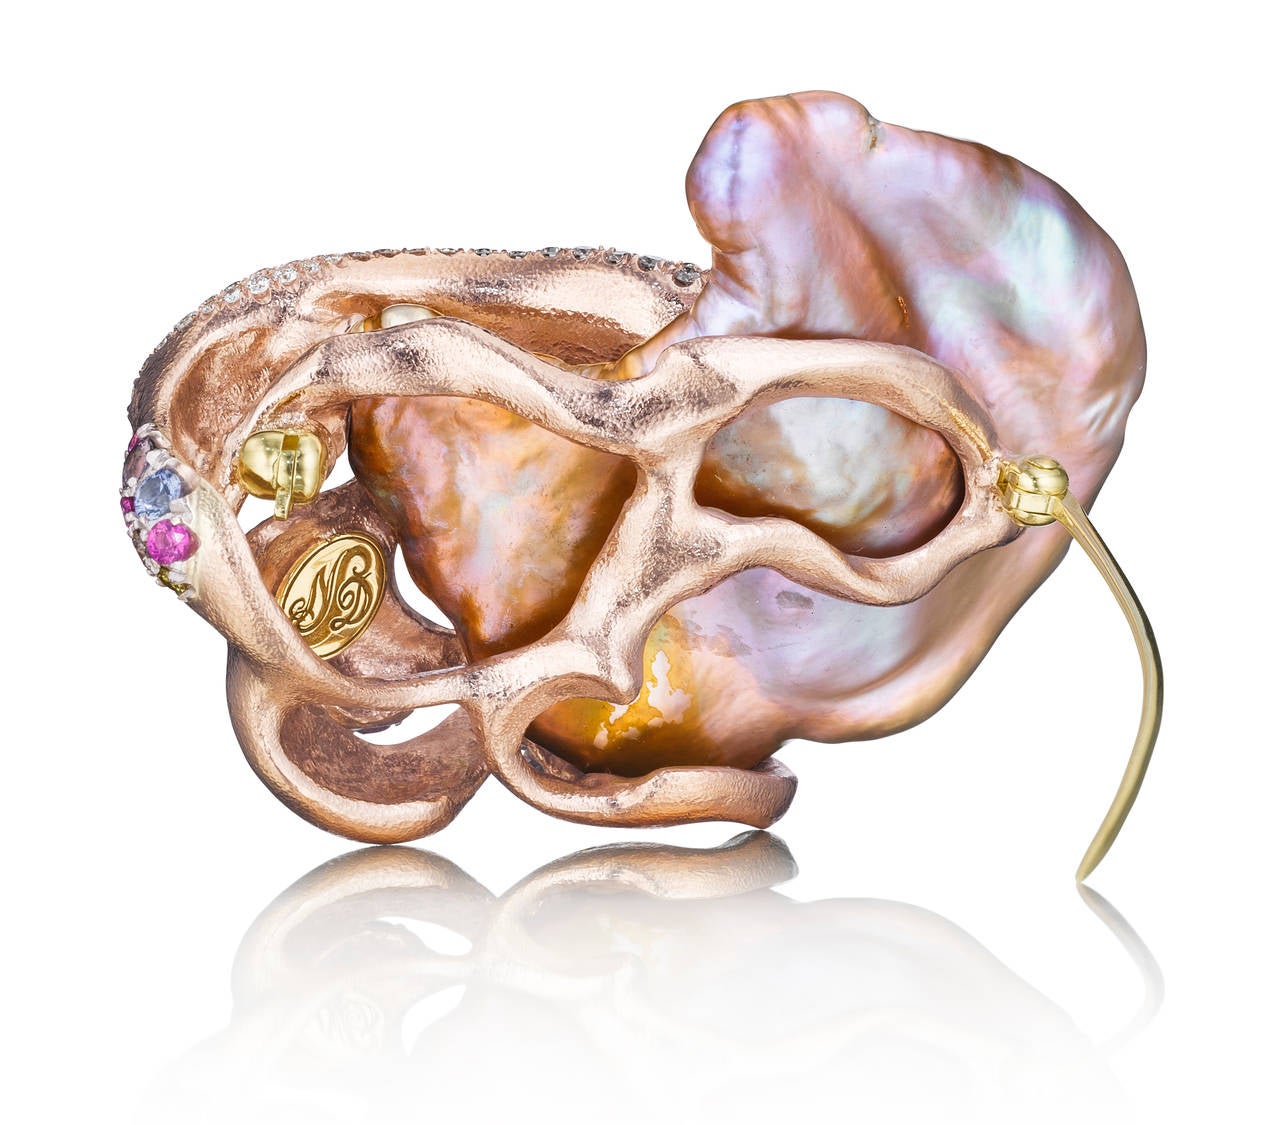 A completely original, award winning, extraordinary design featuring a Chinese freshwater pearl in purples, pinks, and golds. It is surrounded by a wave of 18K peach gold and platinum set with multicolored diamonds, sapphires, and amethysts which